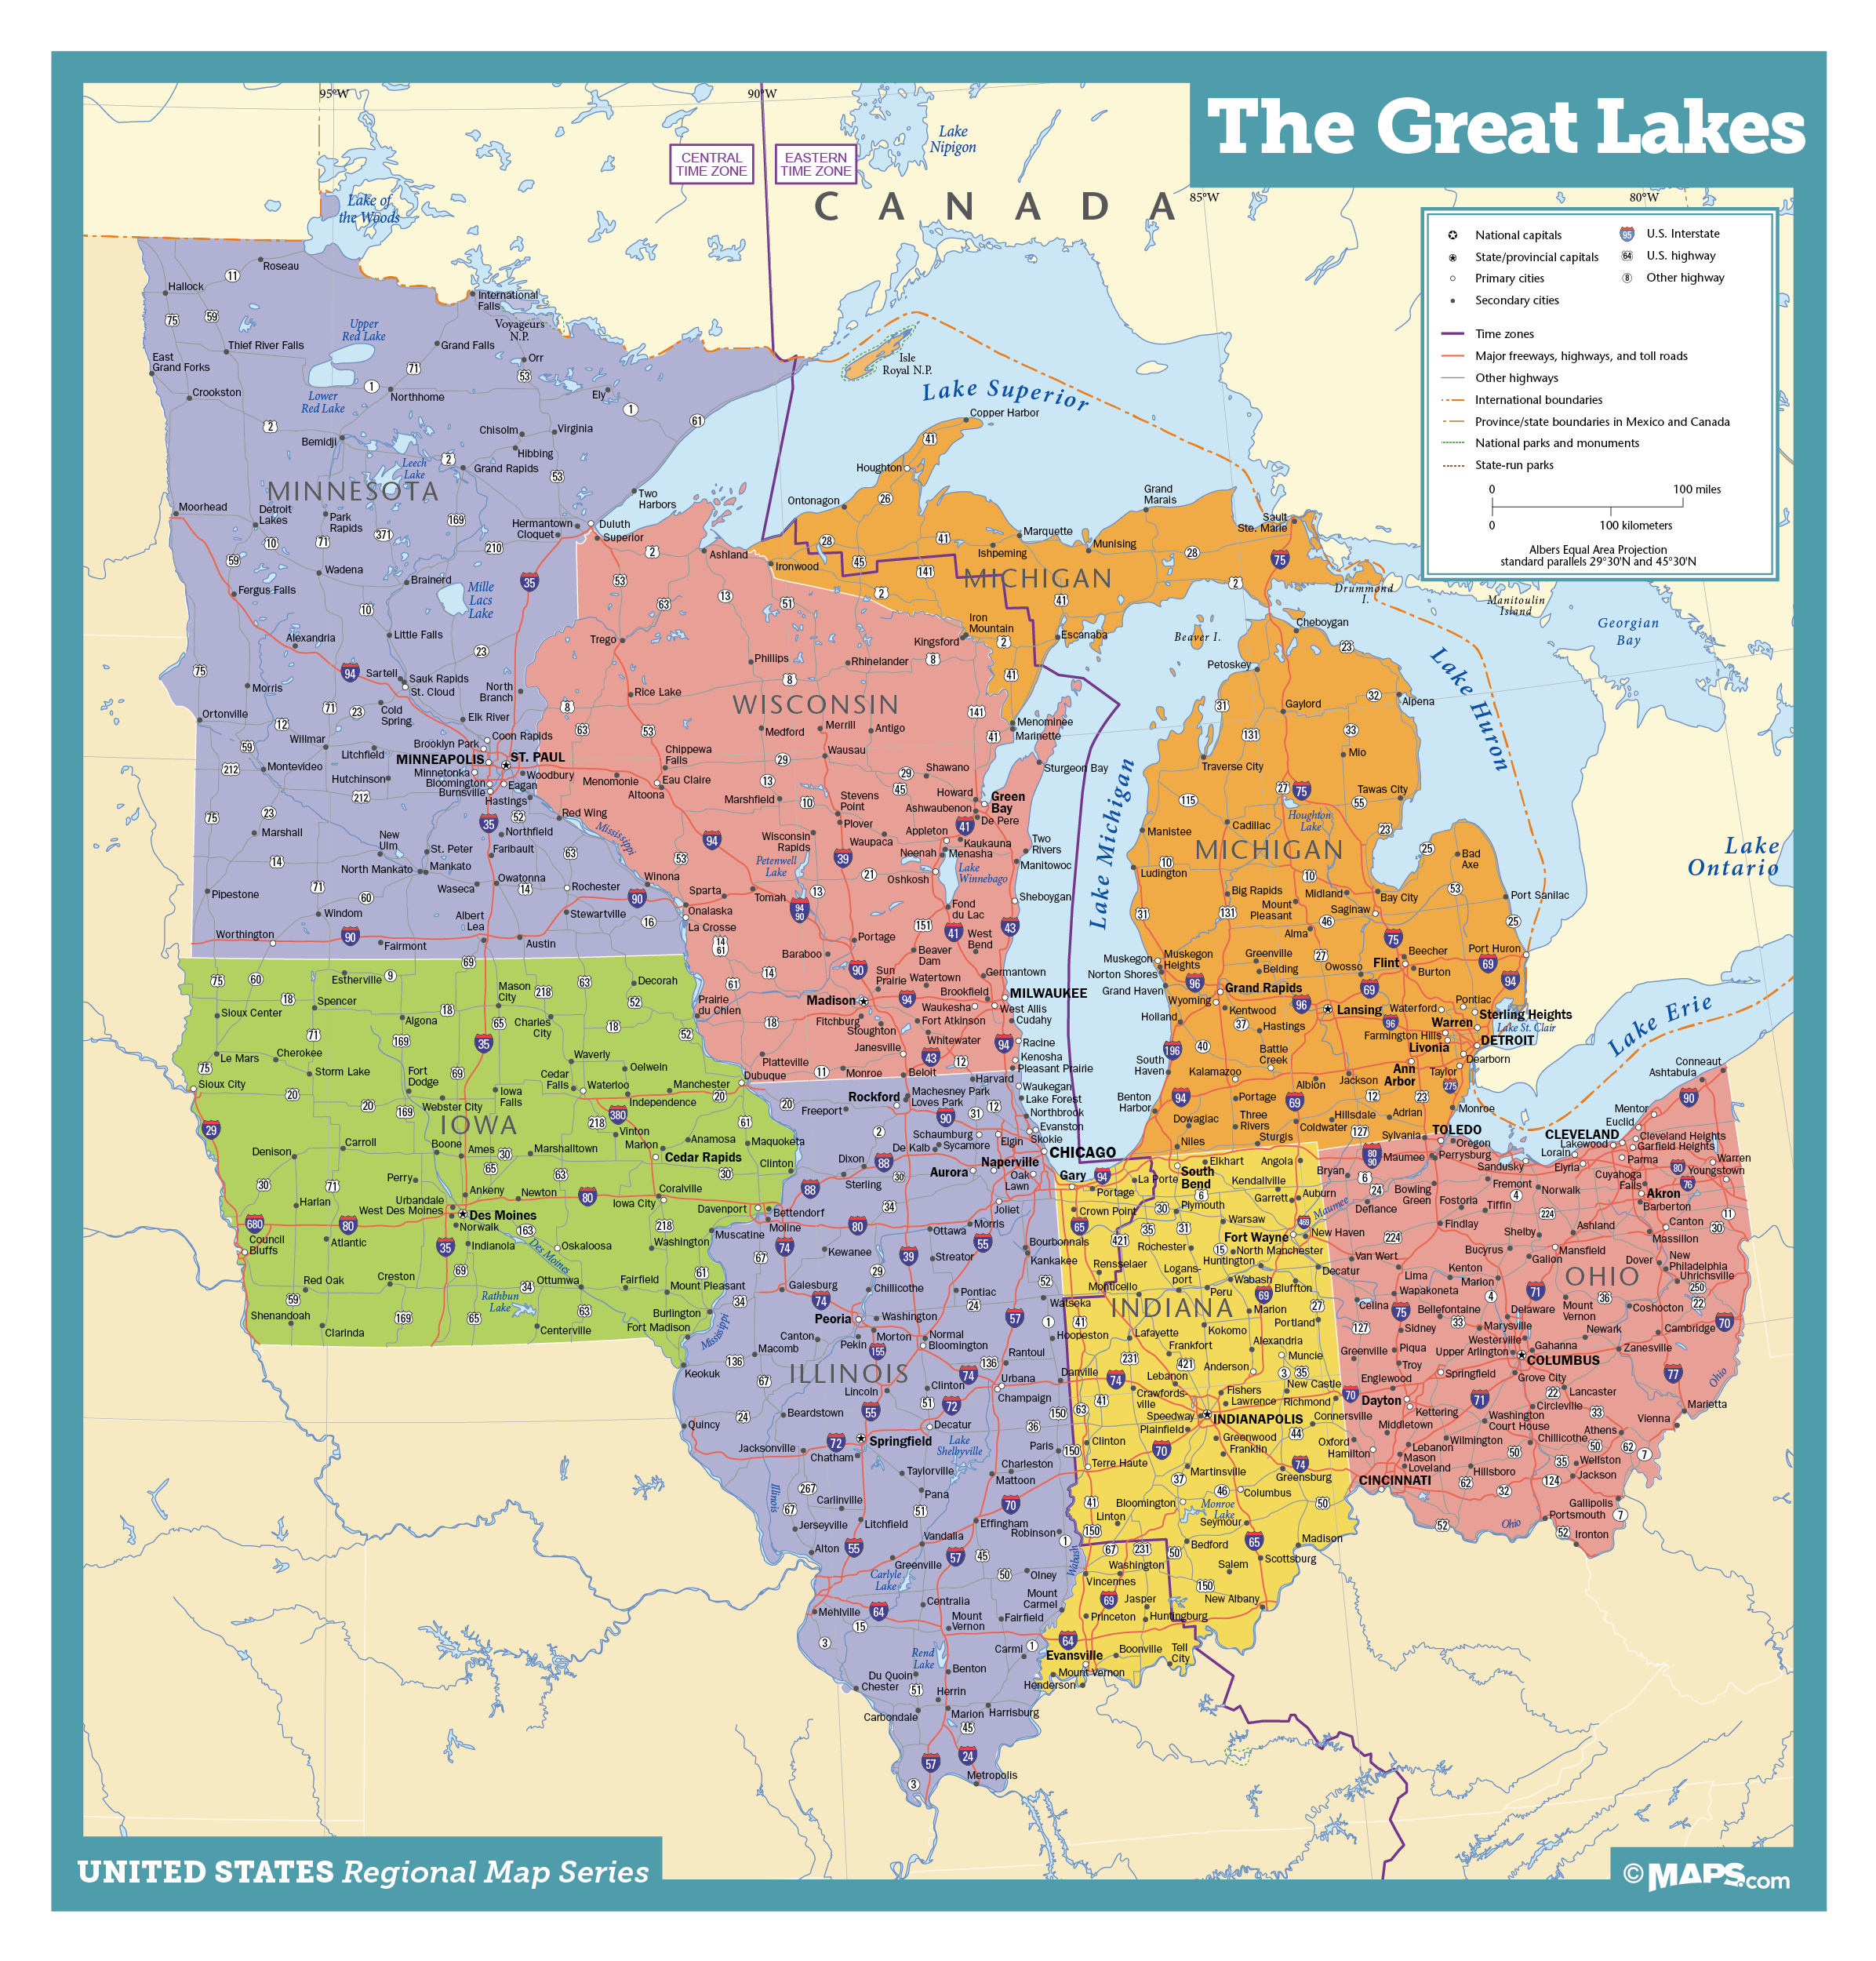 Map Of Great Lakes States Great Lakes States Wall Map | Maps.com.com